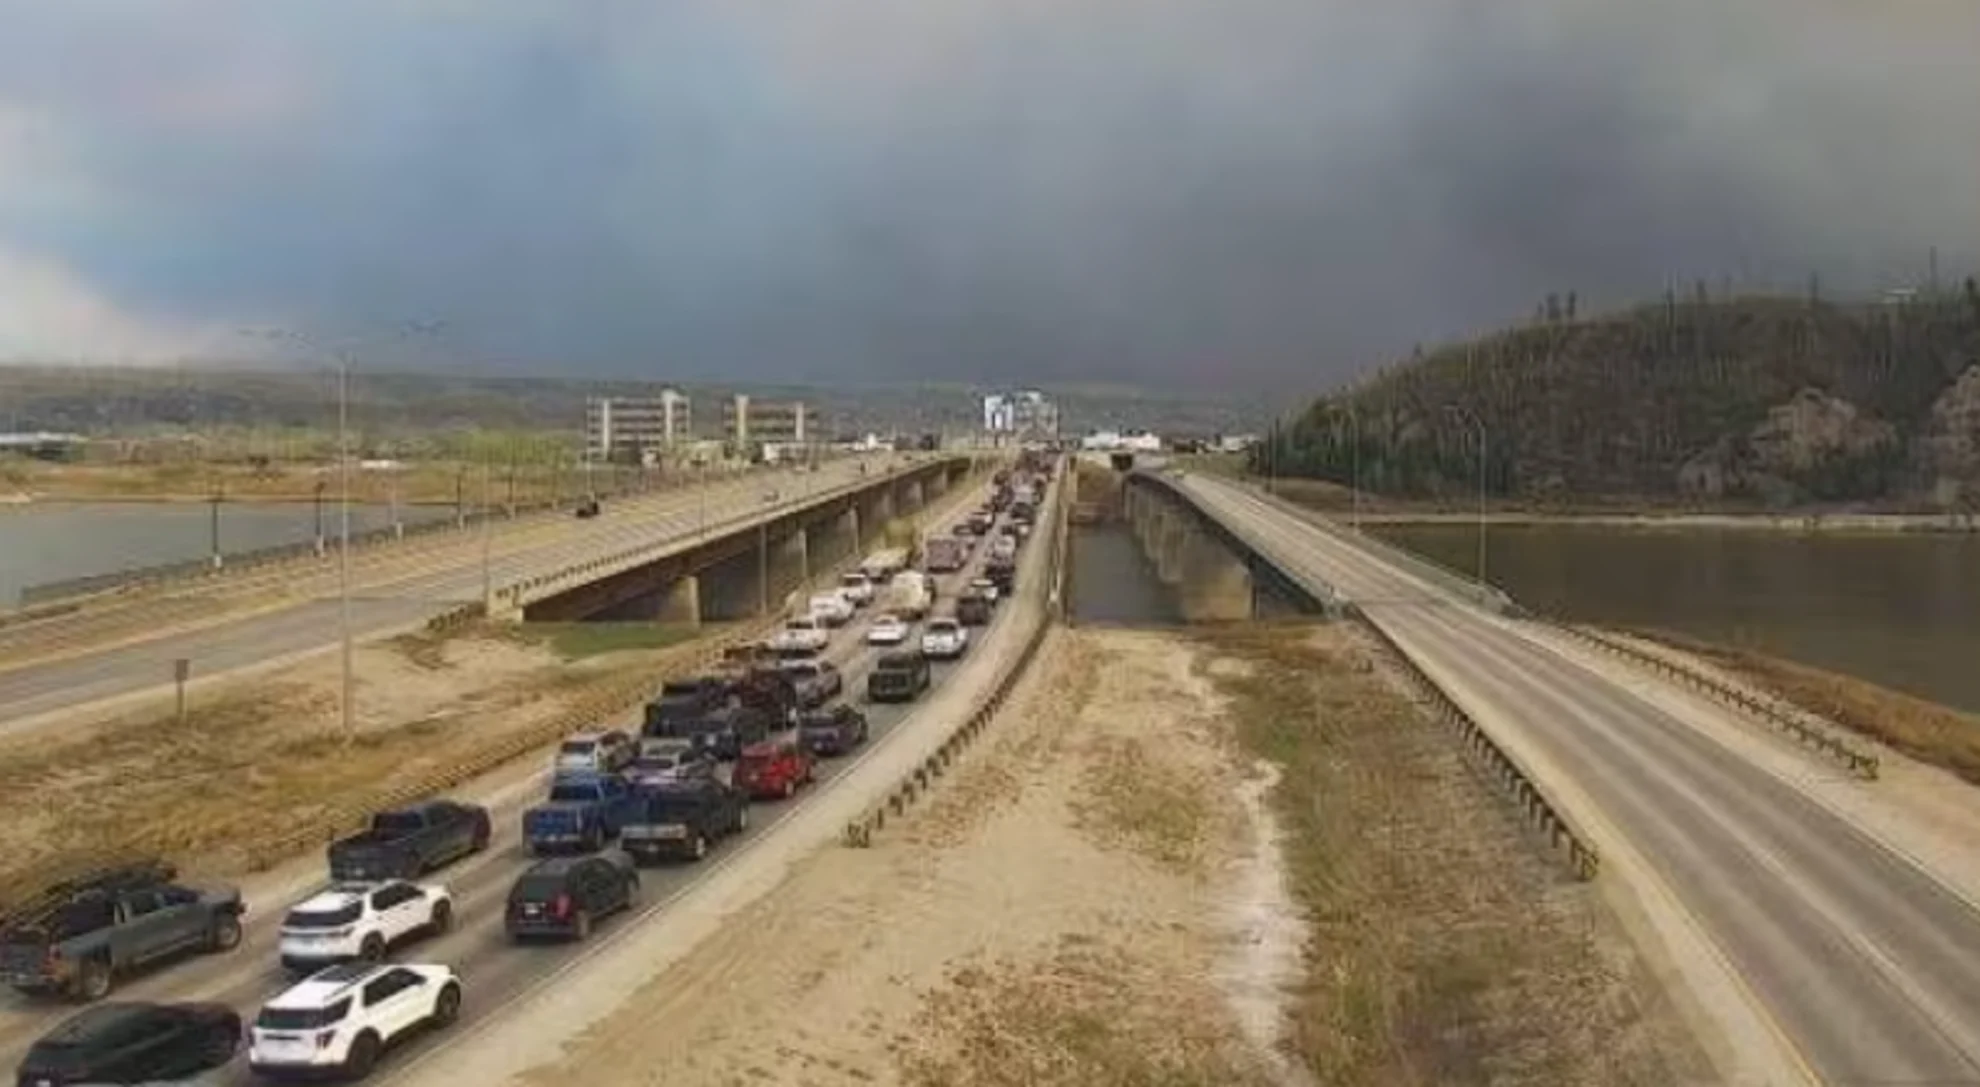 Fear, and anxiety builds as thousands flee their homes in Fort McMurray due to threat of wildfire. Latest details, here